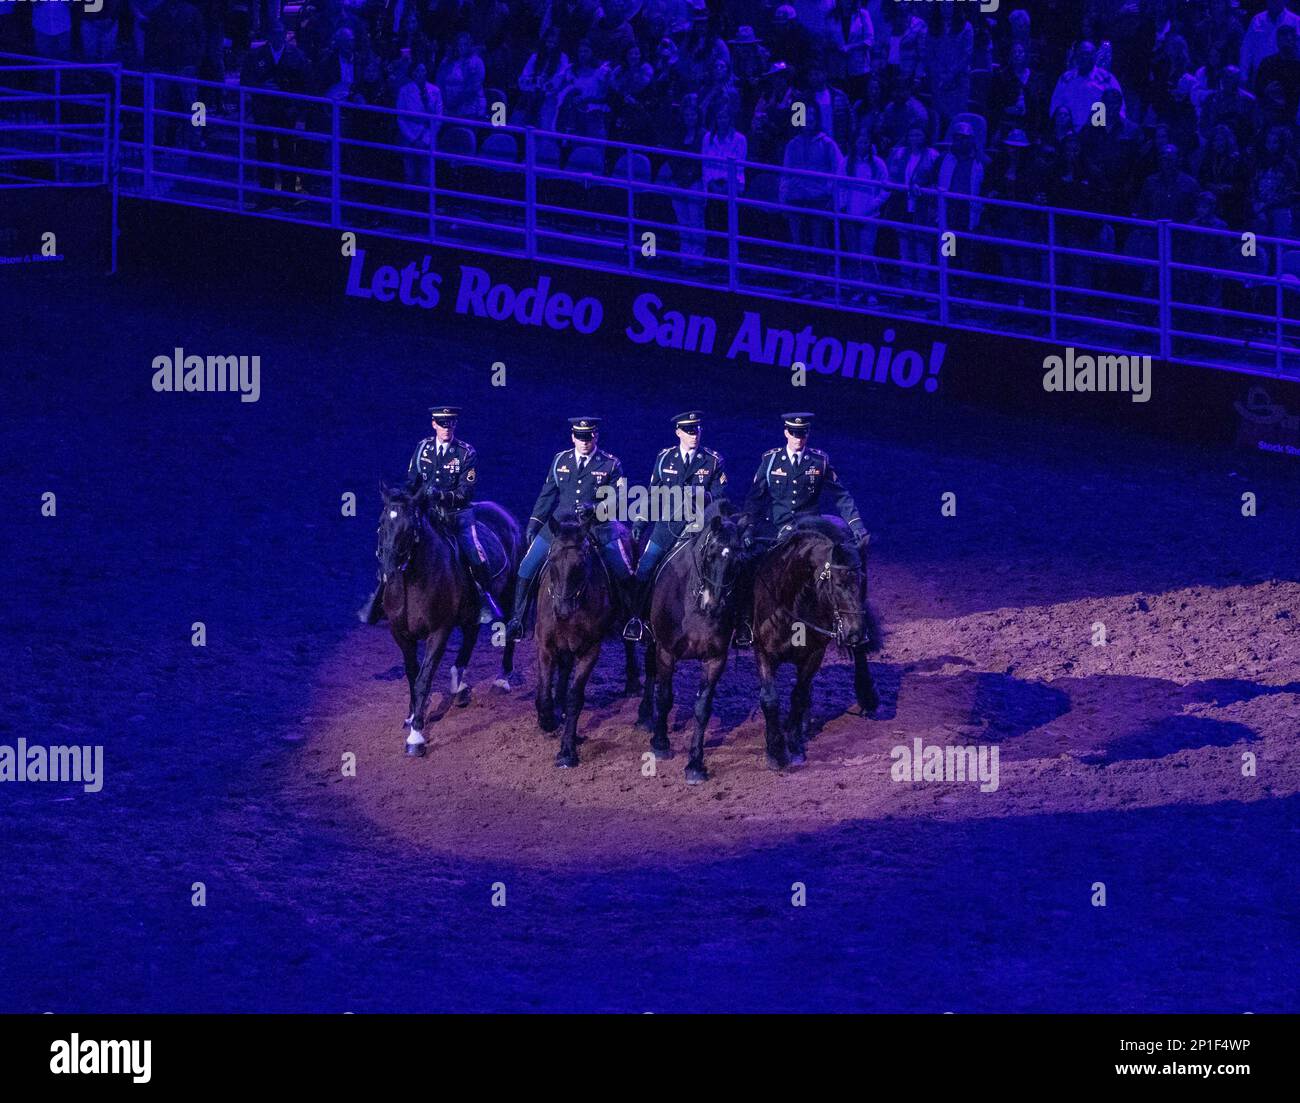 U.S. Army North Caisson Platoon members ride horses in formation during Military Appreciation Night at the San Antonio Stock Show and Rodeo in San Antonio, Texas, Feb. 18, 2023. The San Antonio Stock Show and Rodeo is one of the largest events held each year with approximately 1.5 million visitors entering the fairgrounds each year. Stock Photo